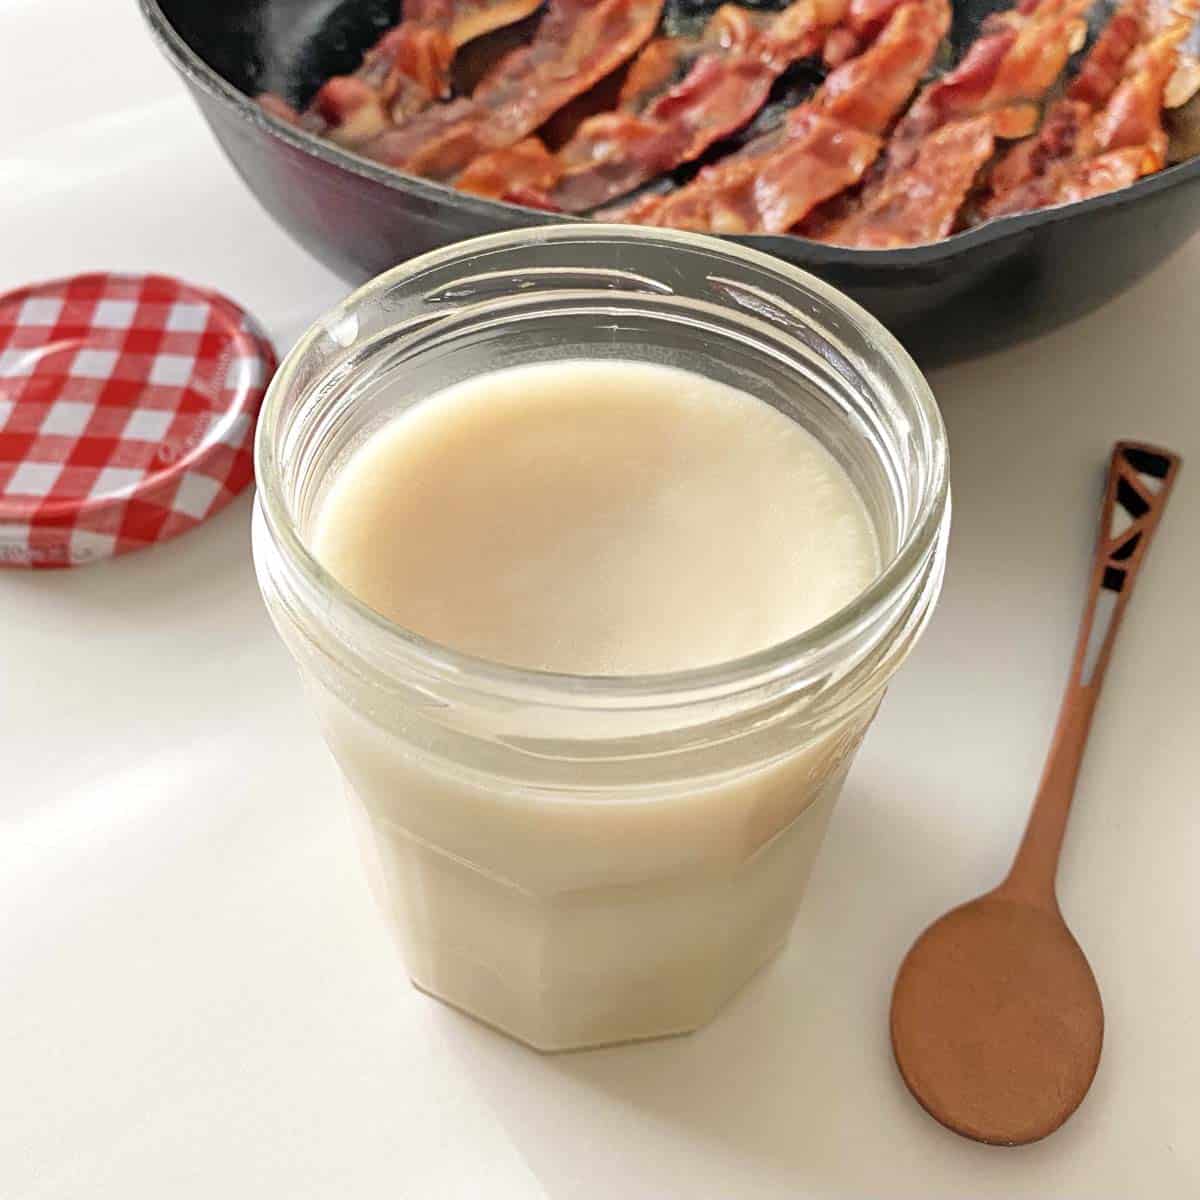 Bacon grease in a jar with a brown wooden spoon and a cast iron skillet of bacon cooking in the background. A red and white jar lid to the left.